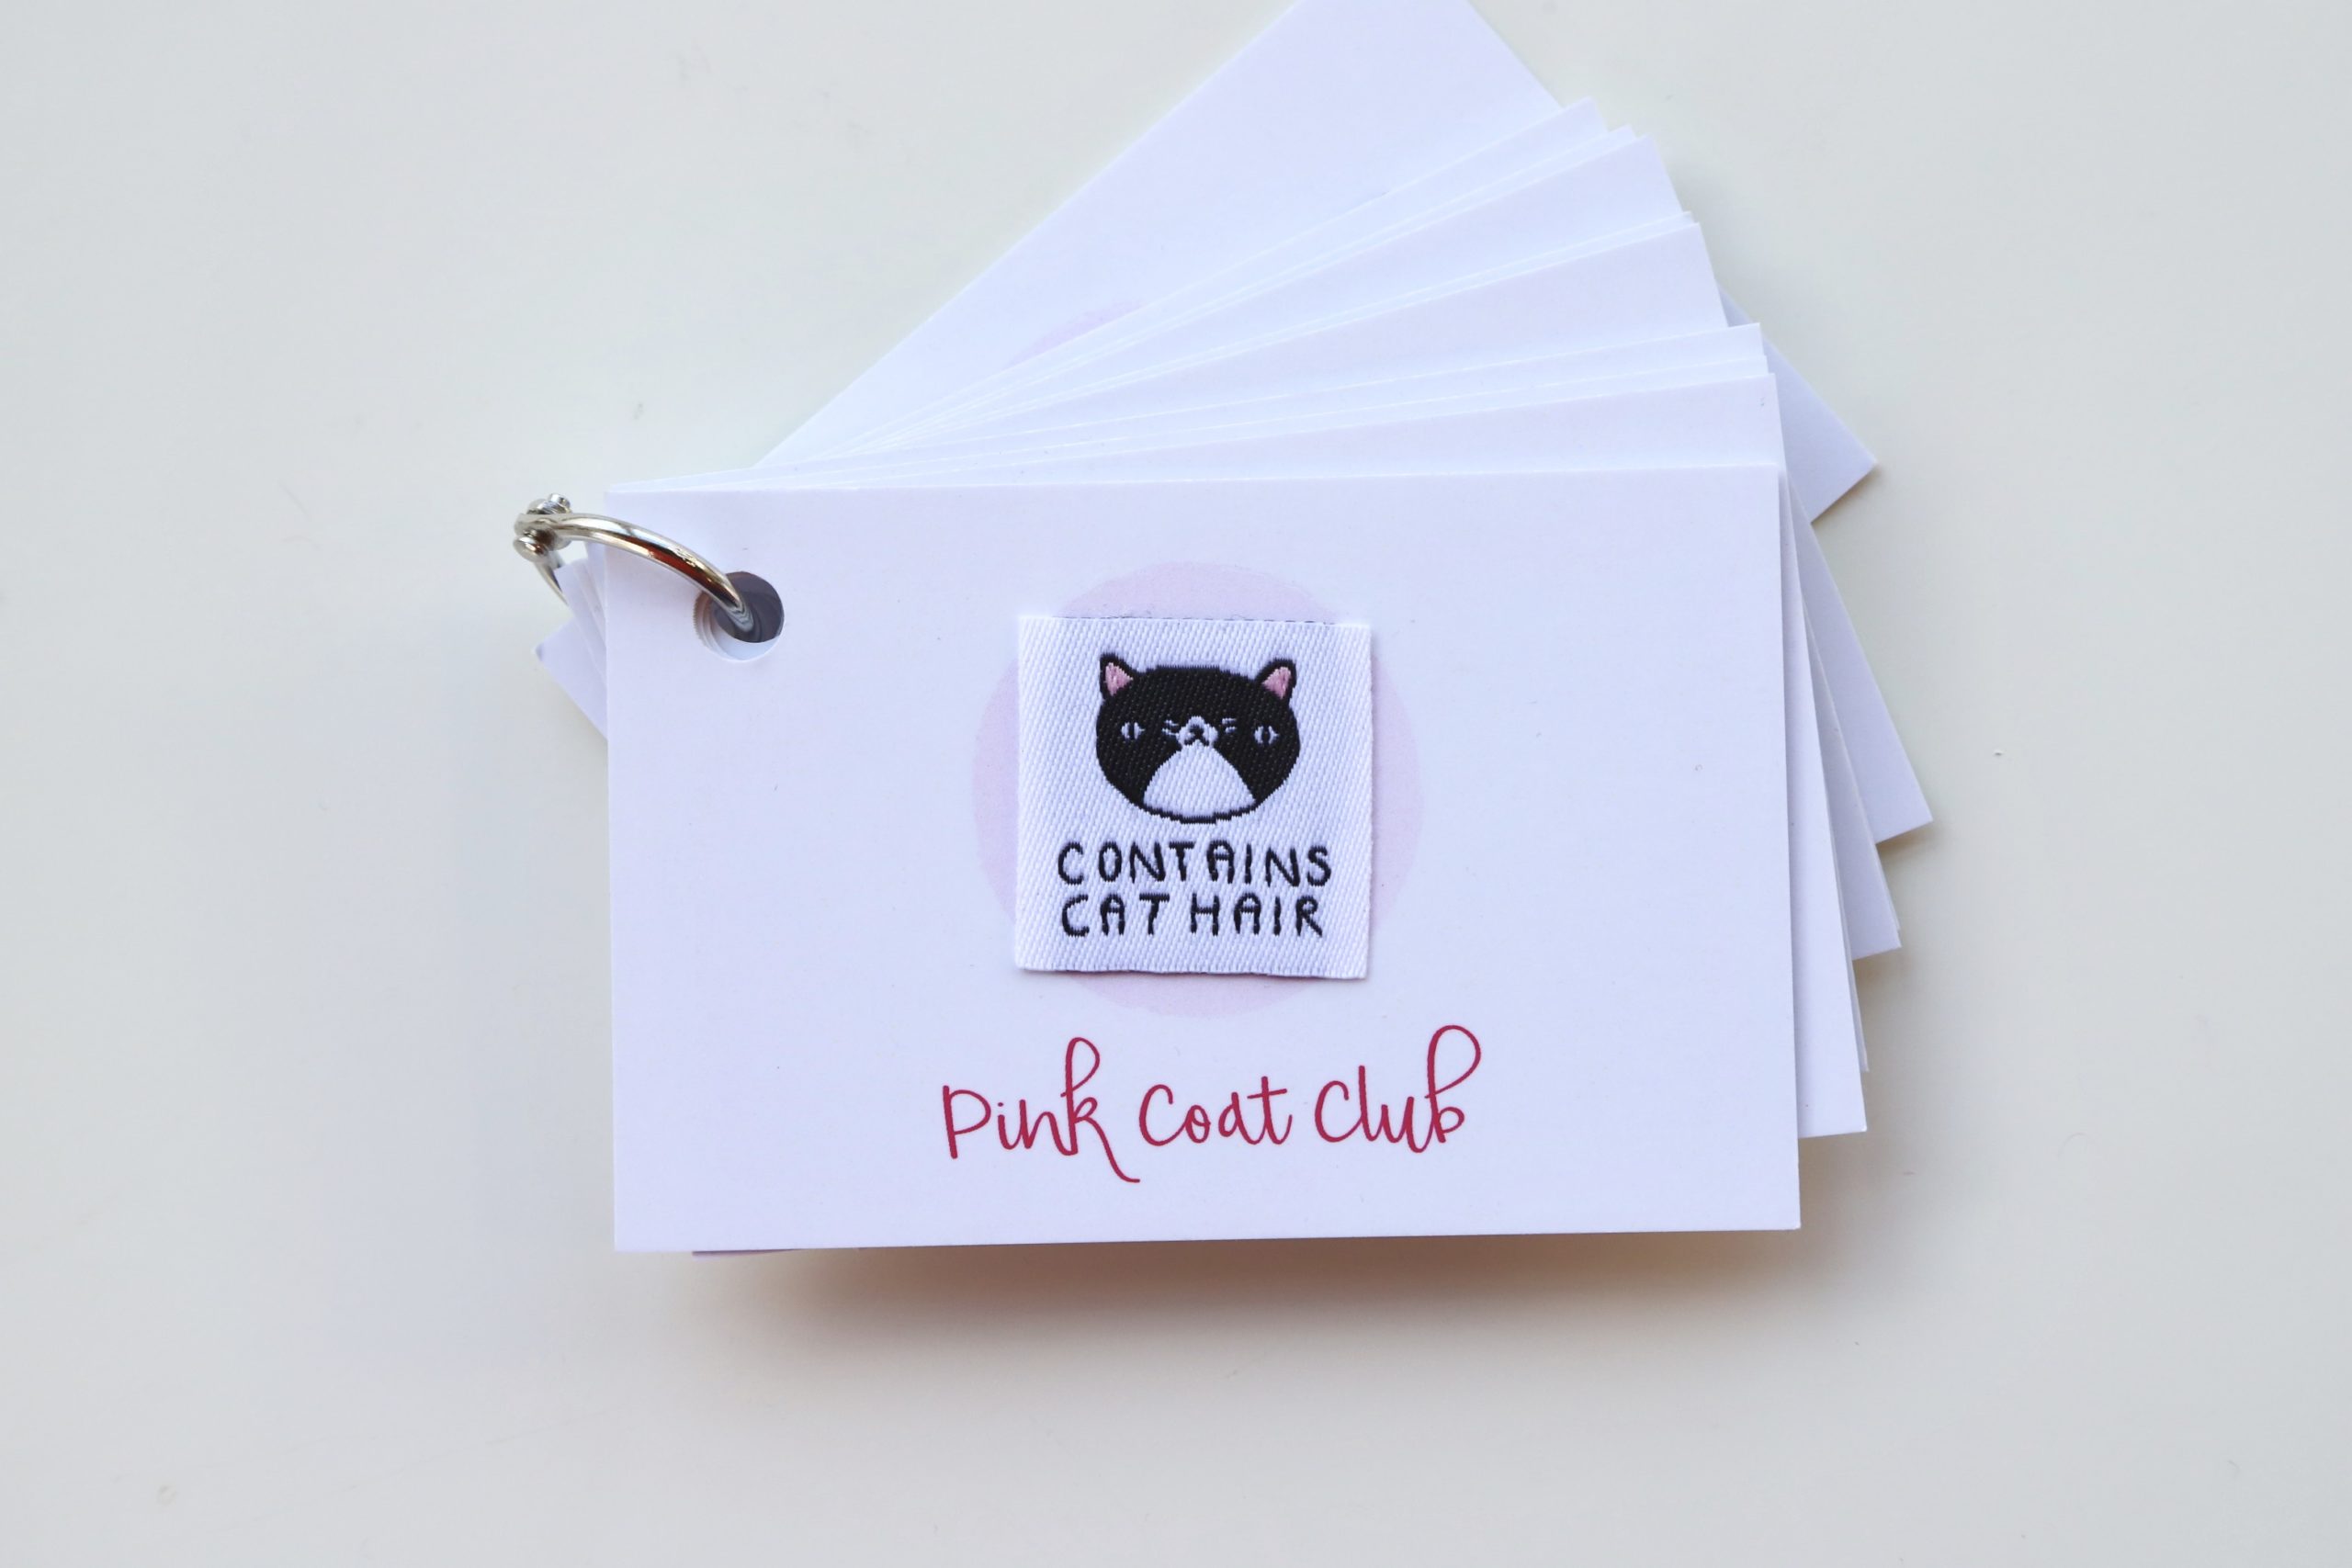 Contains Cat Hair (Black) – 6 Garment Labels by Pink Coat Club